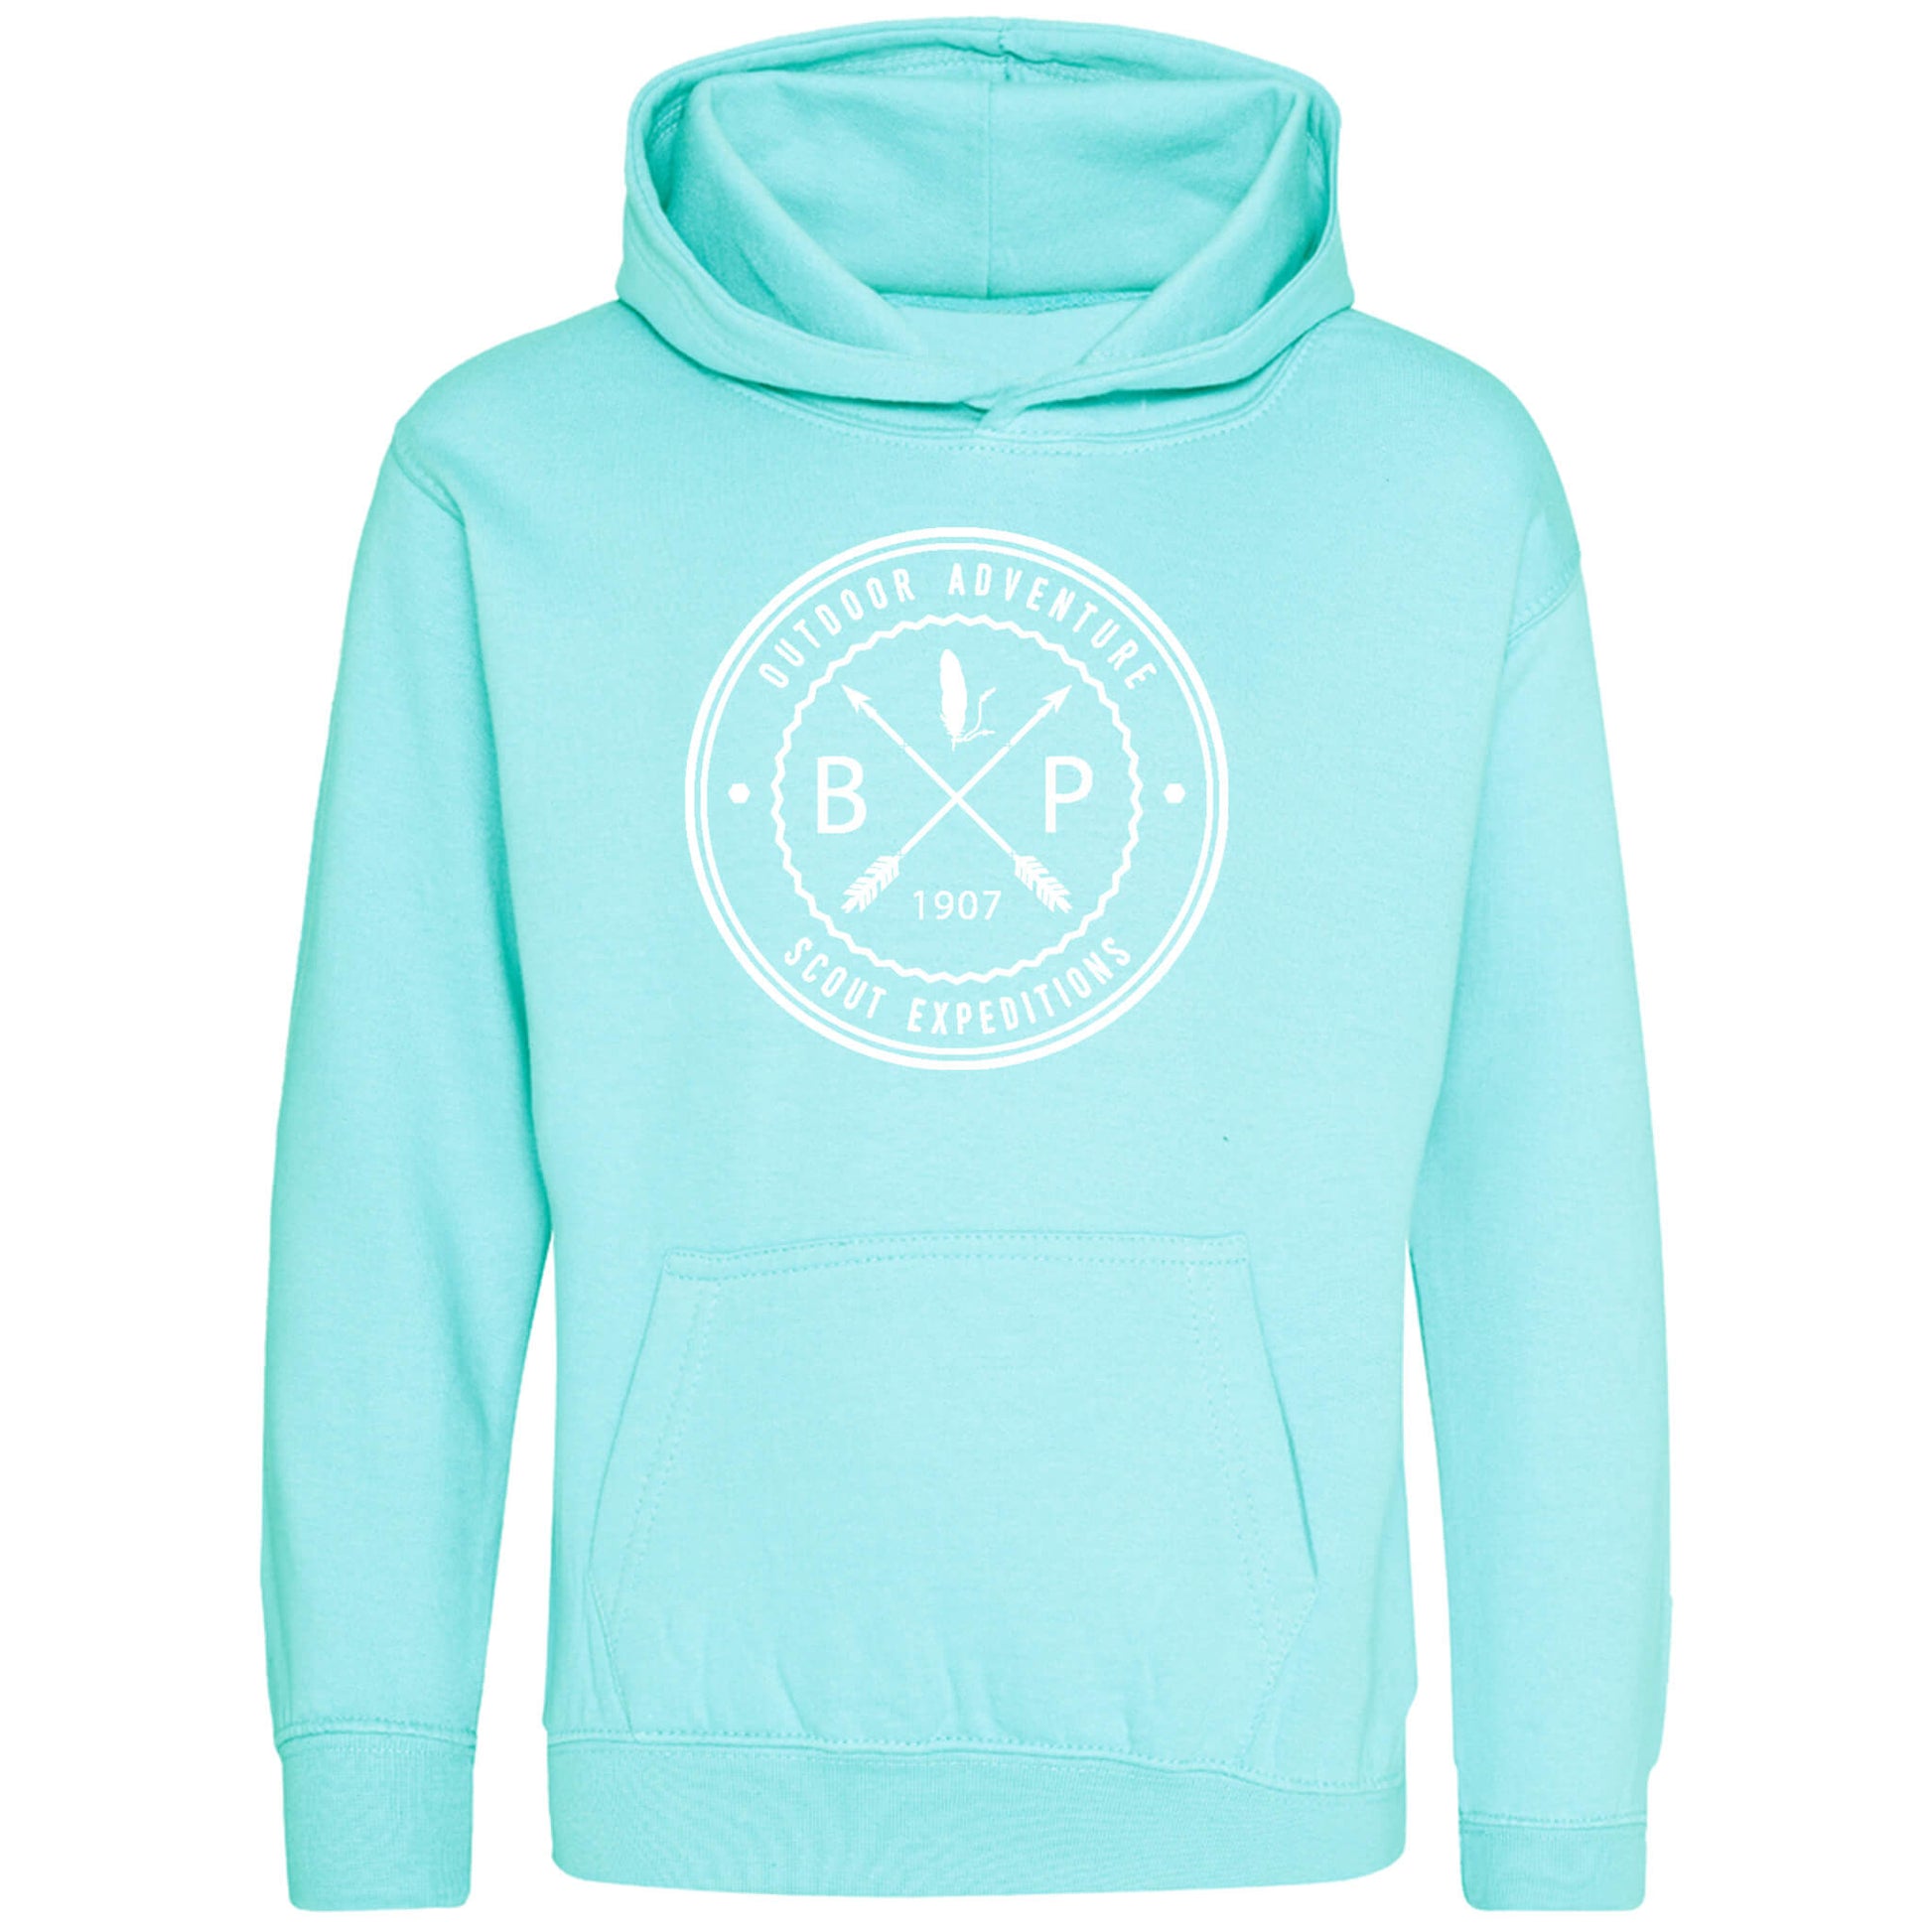 Bp Scouting Expeditions Since 1907 Hoodie mint